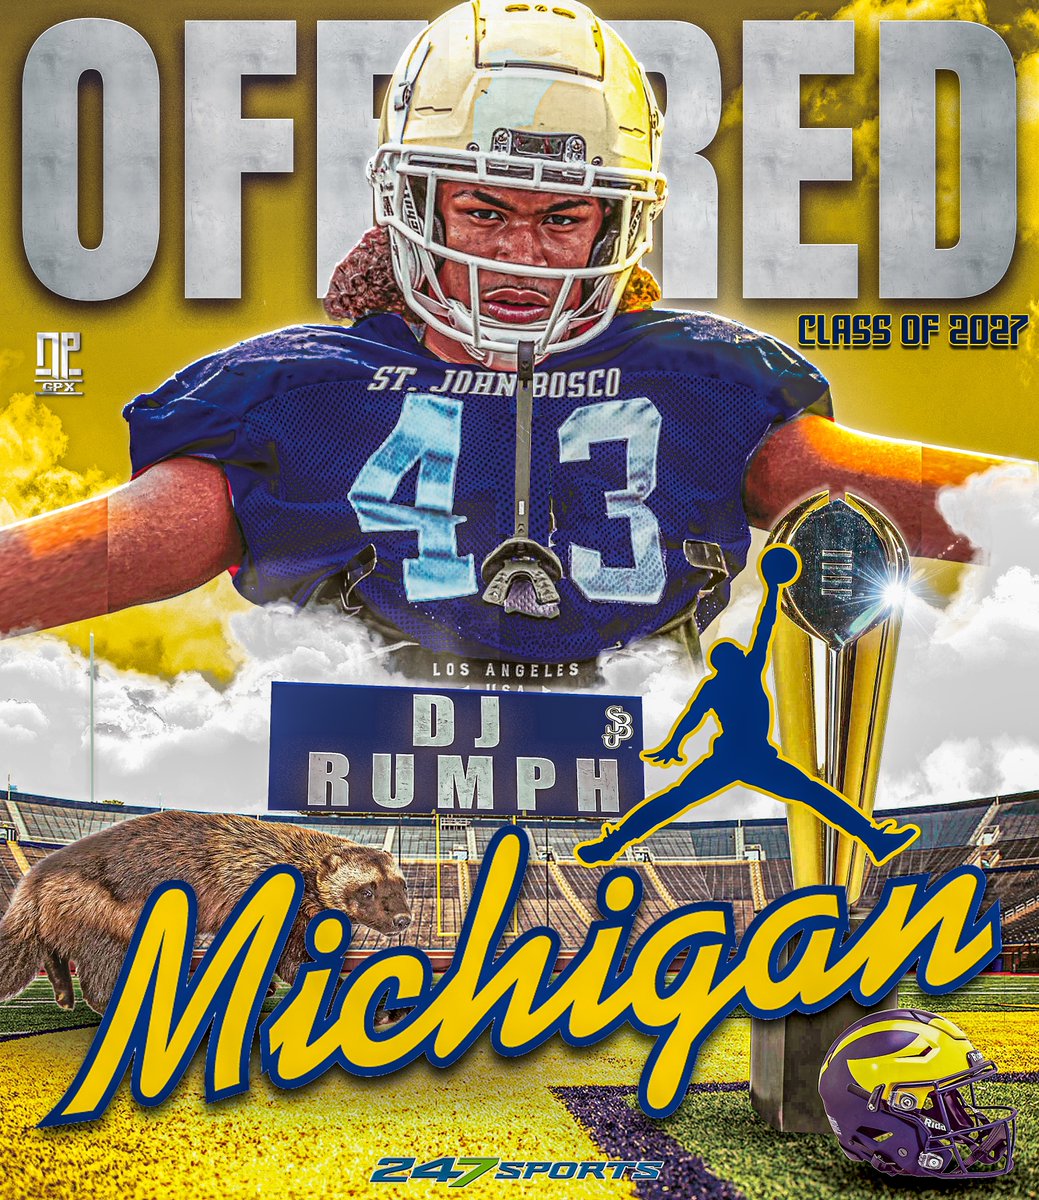 Class of 2027 edge prospect DJ Rumph (@DjRumph) picks up the offer from the National Champion Michigan Wolverines! The St. John Bosco High School (Bellflower, California) superstar is a name to remember moving forward!